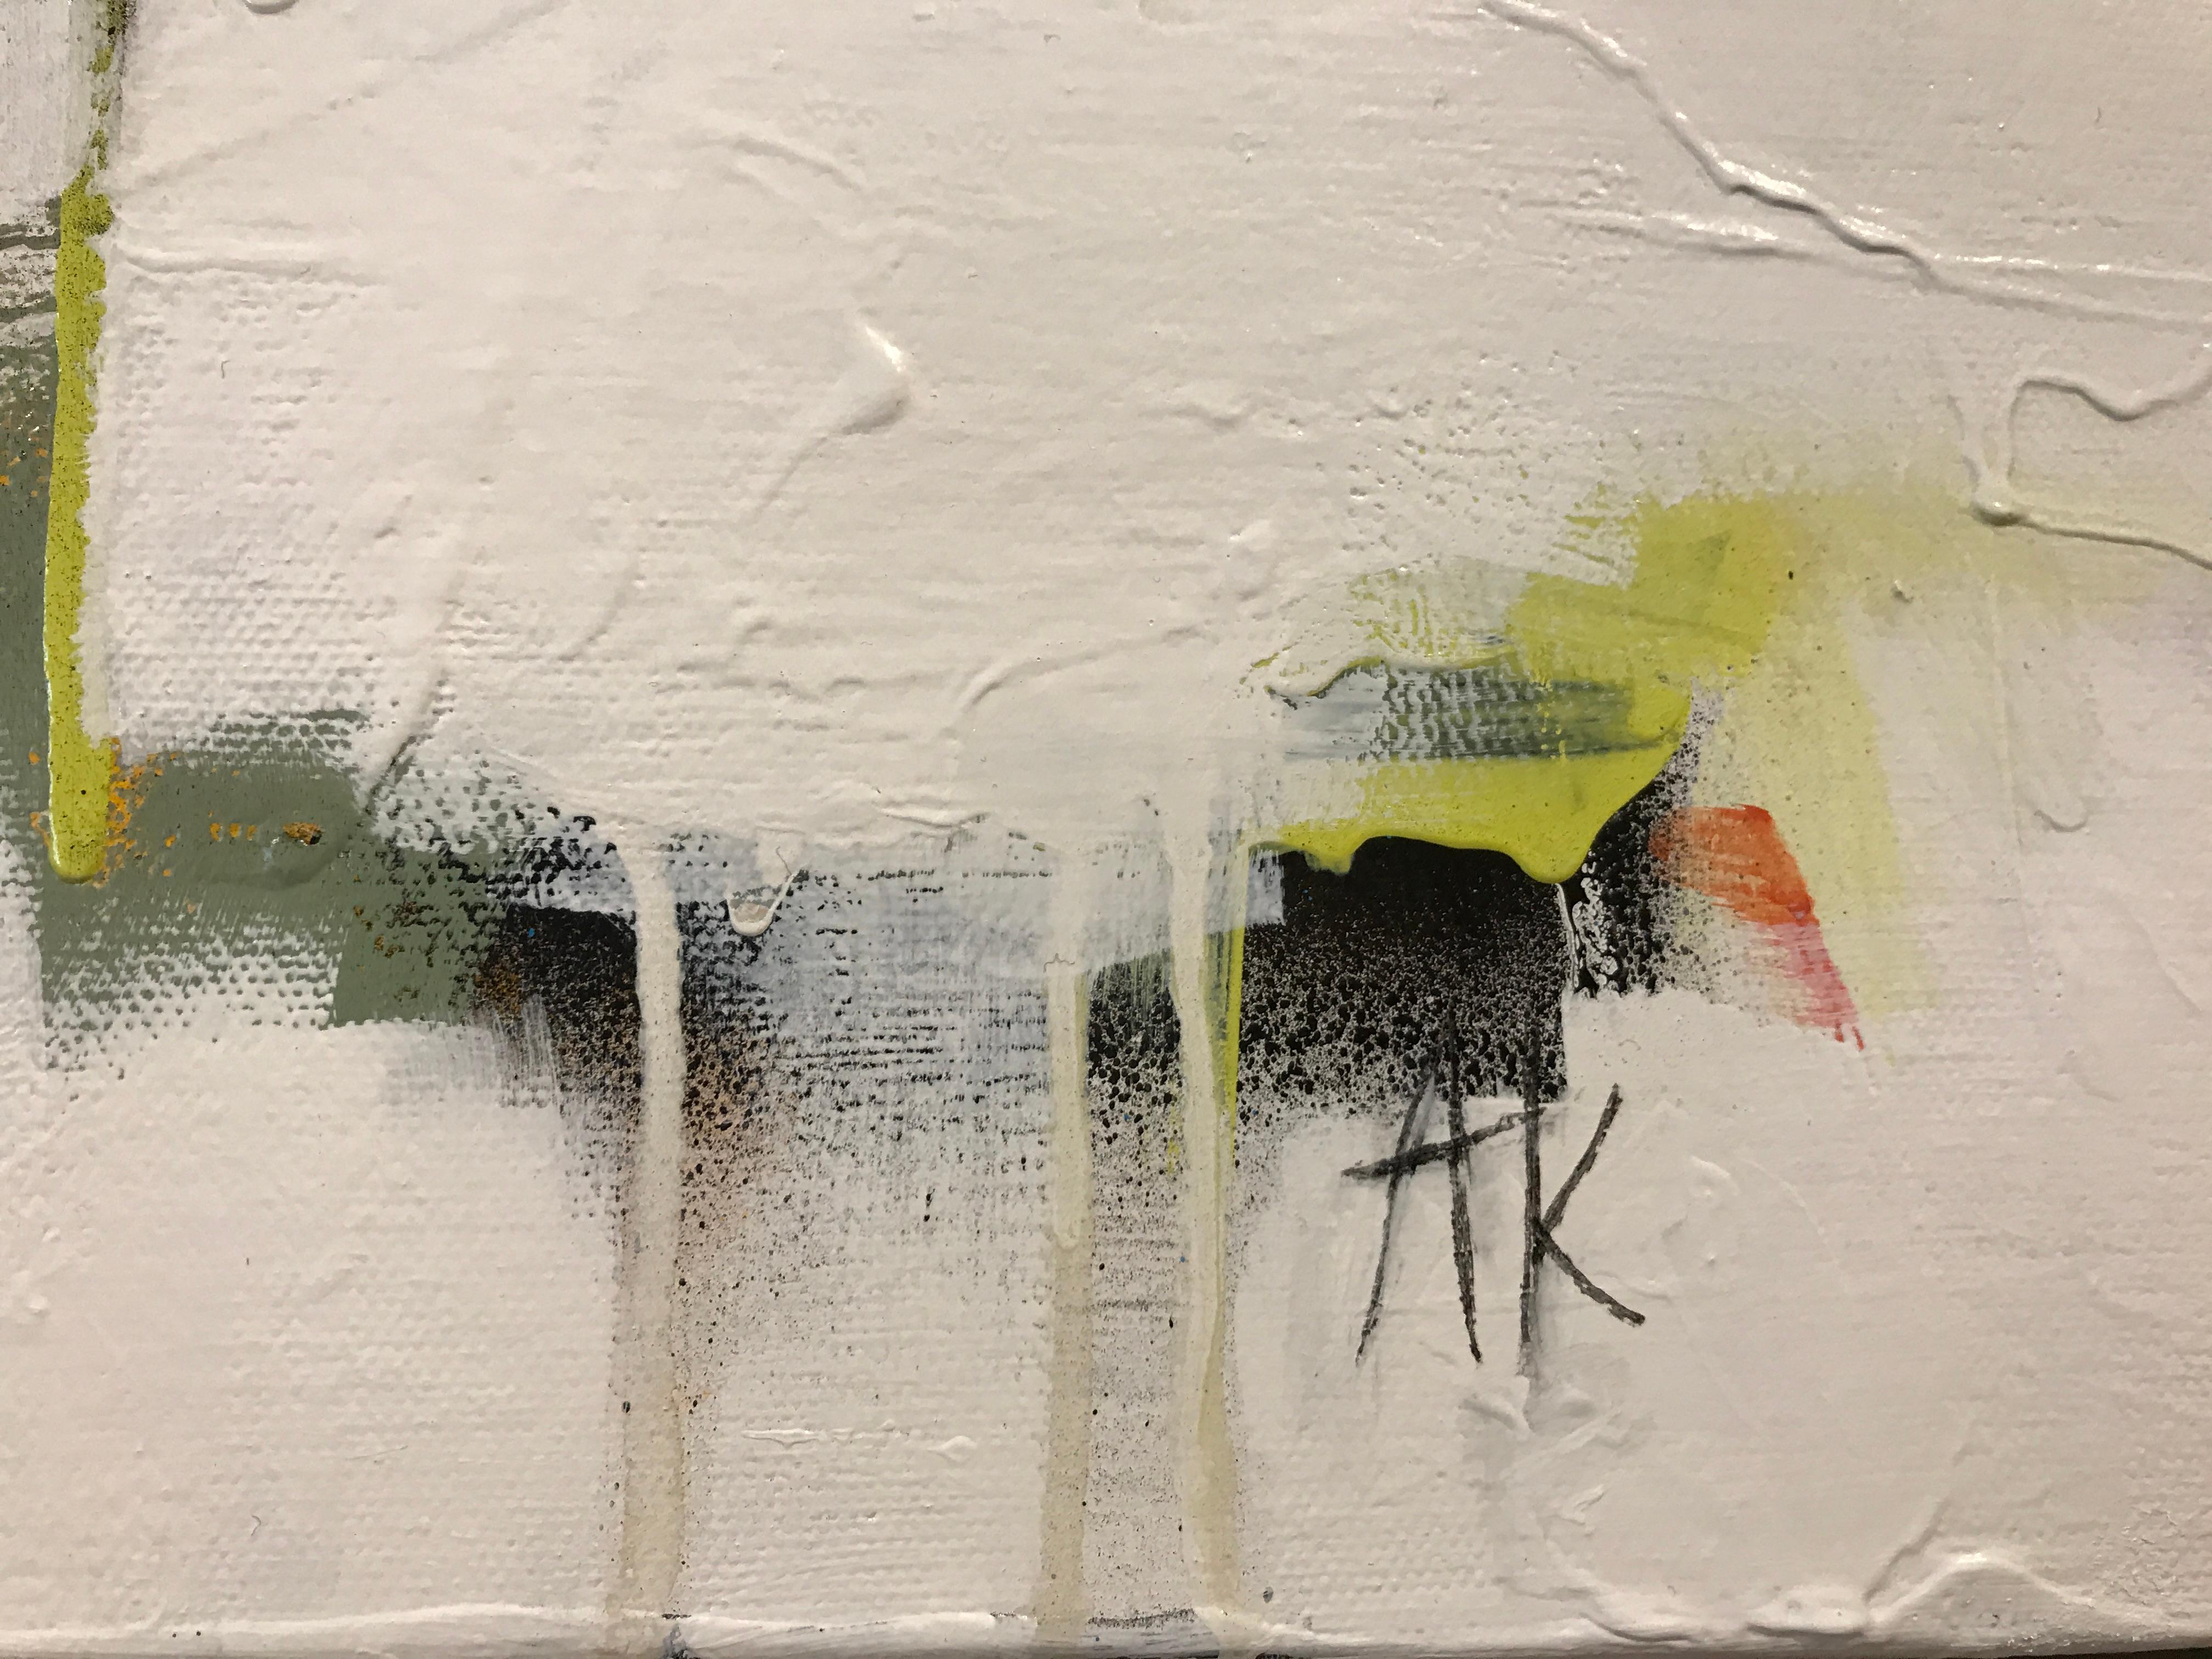 'Autumn' is a medium size mixed media on canvas abstract painting of horizontal format, created by American artist Annie King in 2019. Featuring a palette made of grey, green, white, black and yellow colors accented with touches of red and blue